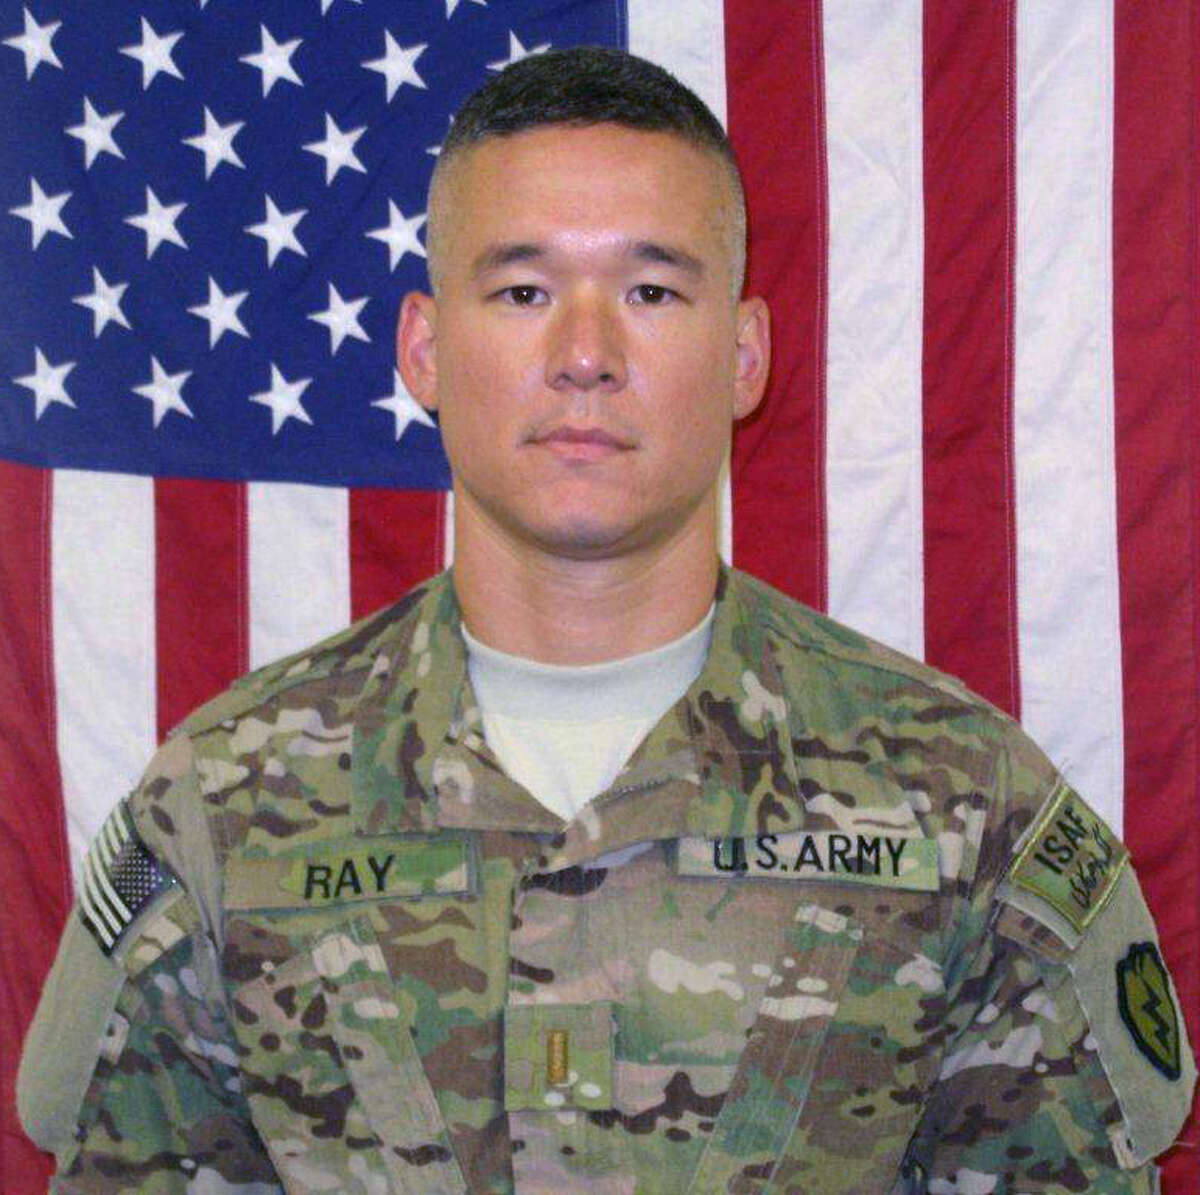 2nd Lt. Clovis T. Ray, 34, of San Antonio, Texas, seen in this undated handout photo provided by the military, died Mar. 15 at Kunar province, Afghanistan of injuries suffered when insurgents attacked his unit with an improvised explosive device. He was assigned to the 2nd Battalion, 35th Infantry Regiment, 3rd Brigade Combat Team, 25th Infantry Division, Schofield Barracks, Hawaii.